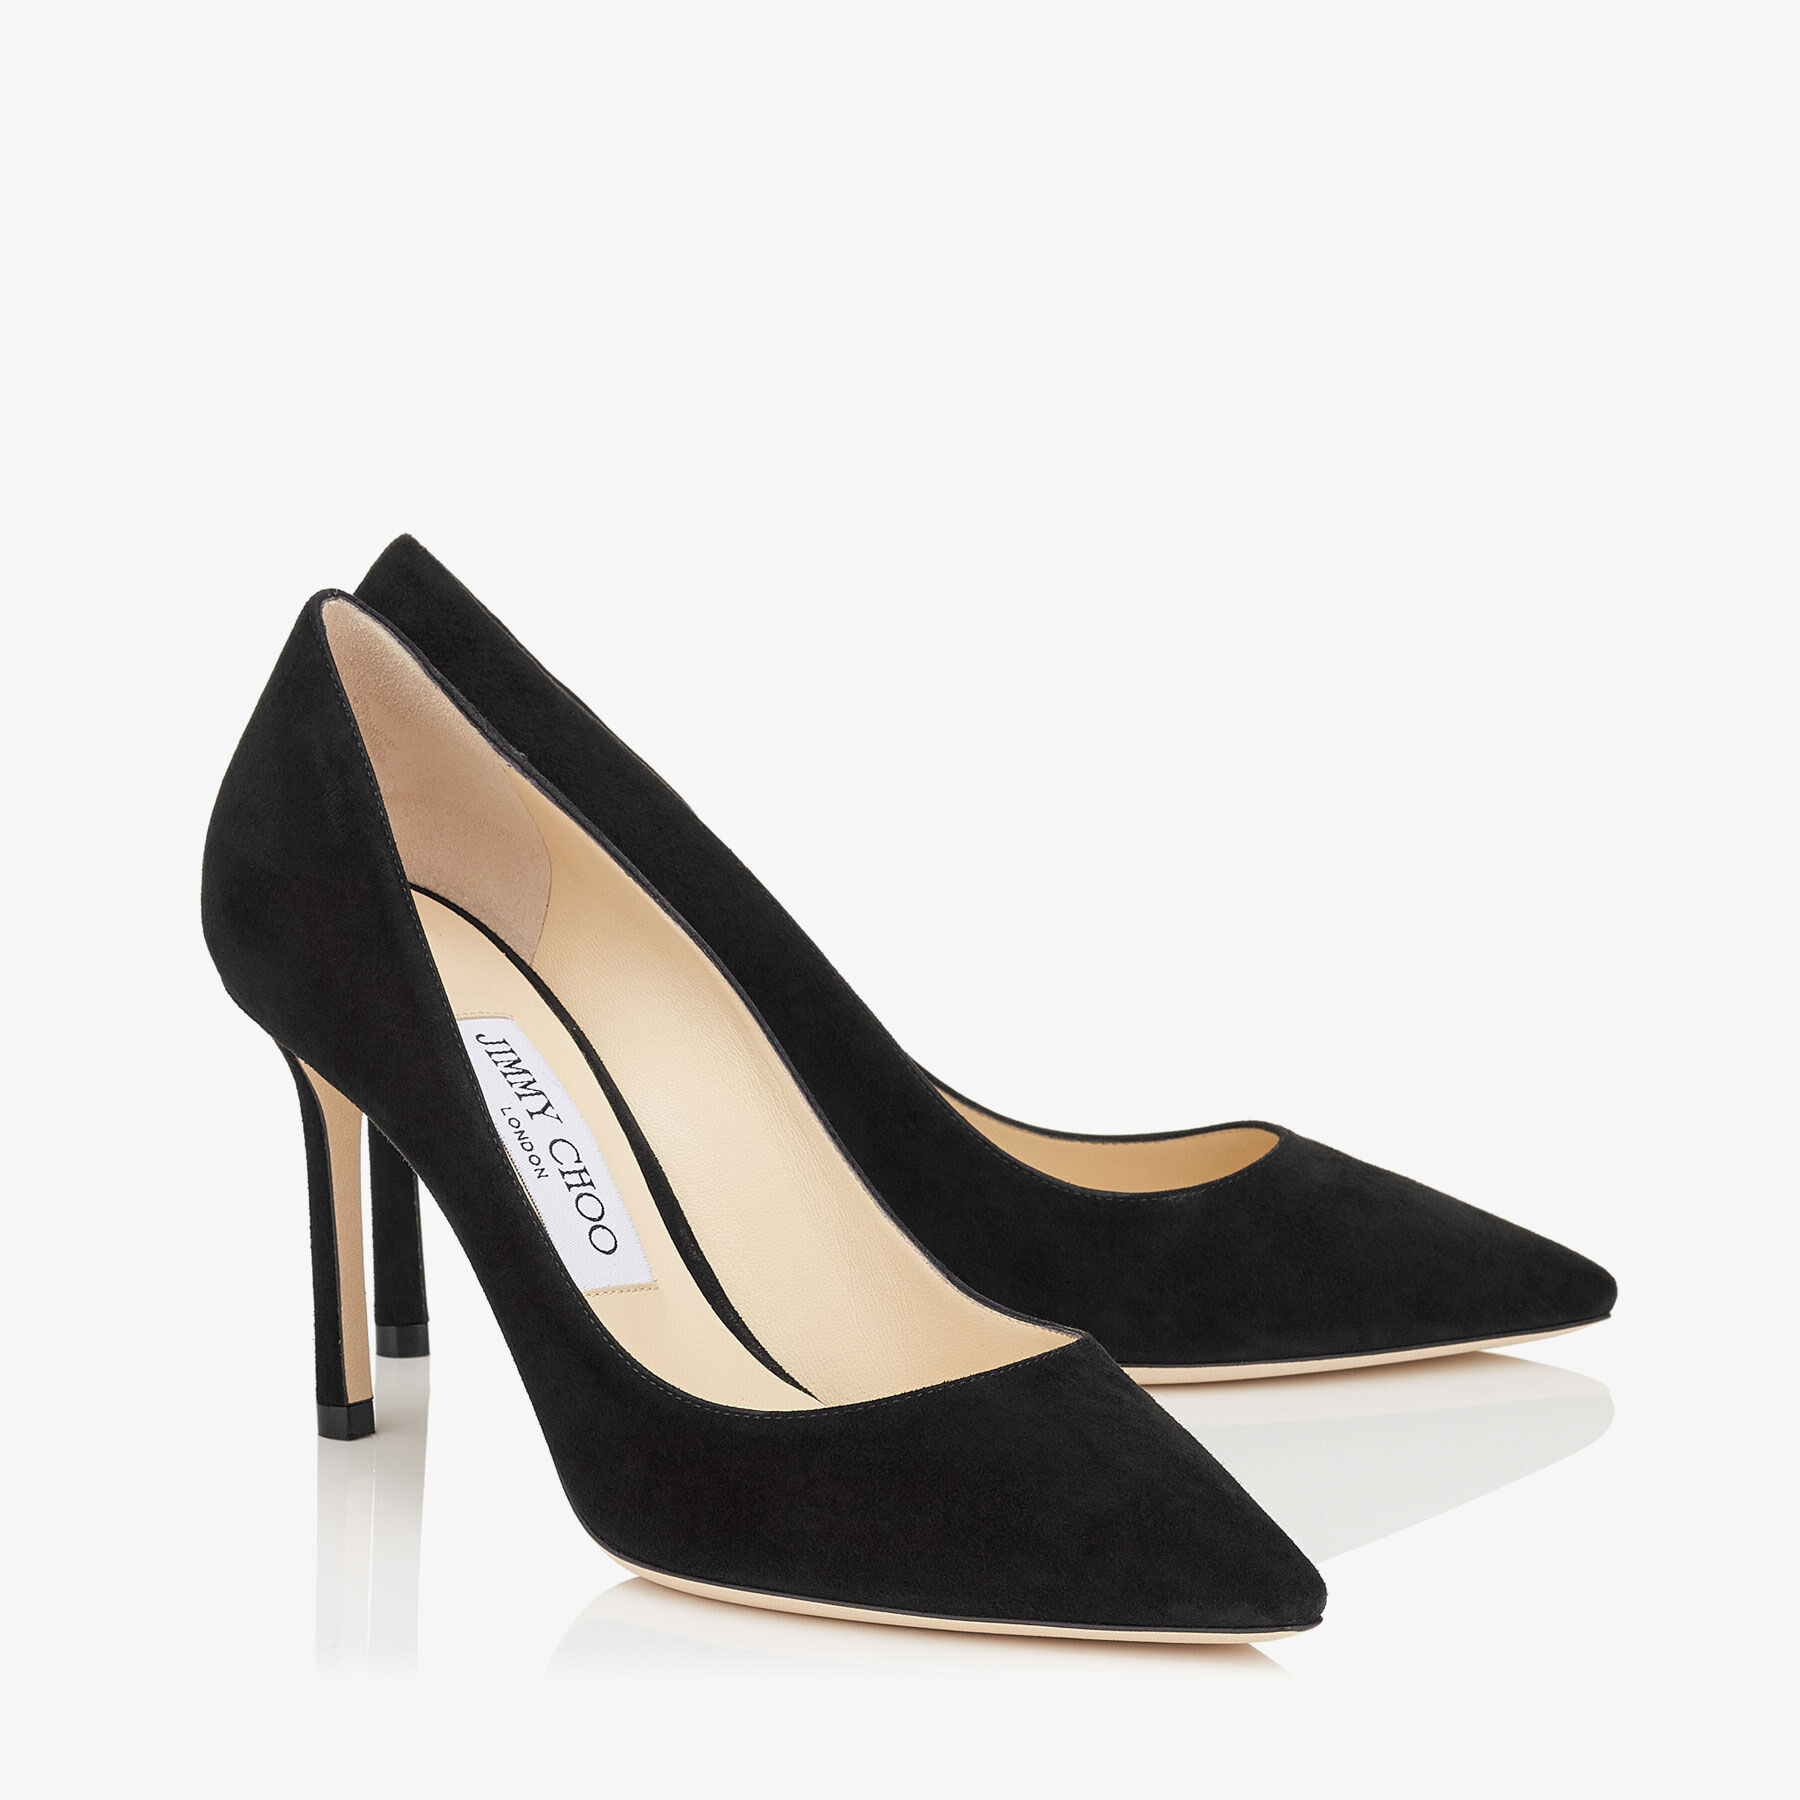 Black Suede Pointed Pumps | Romy 85 | Autumn Winter 16 | JIMMY CHOO